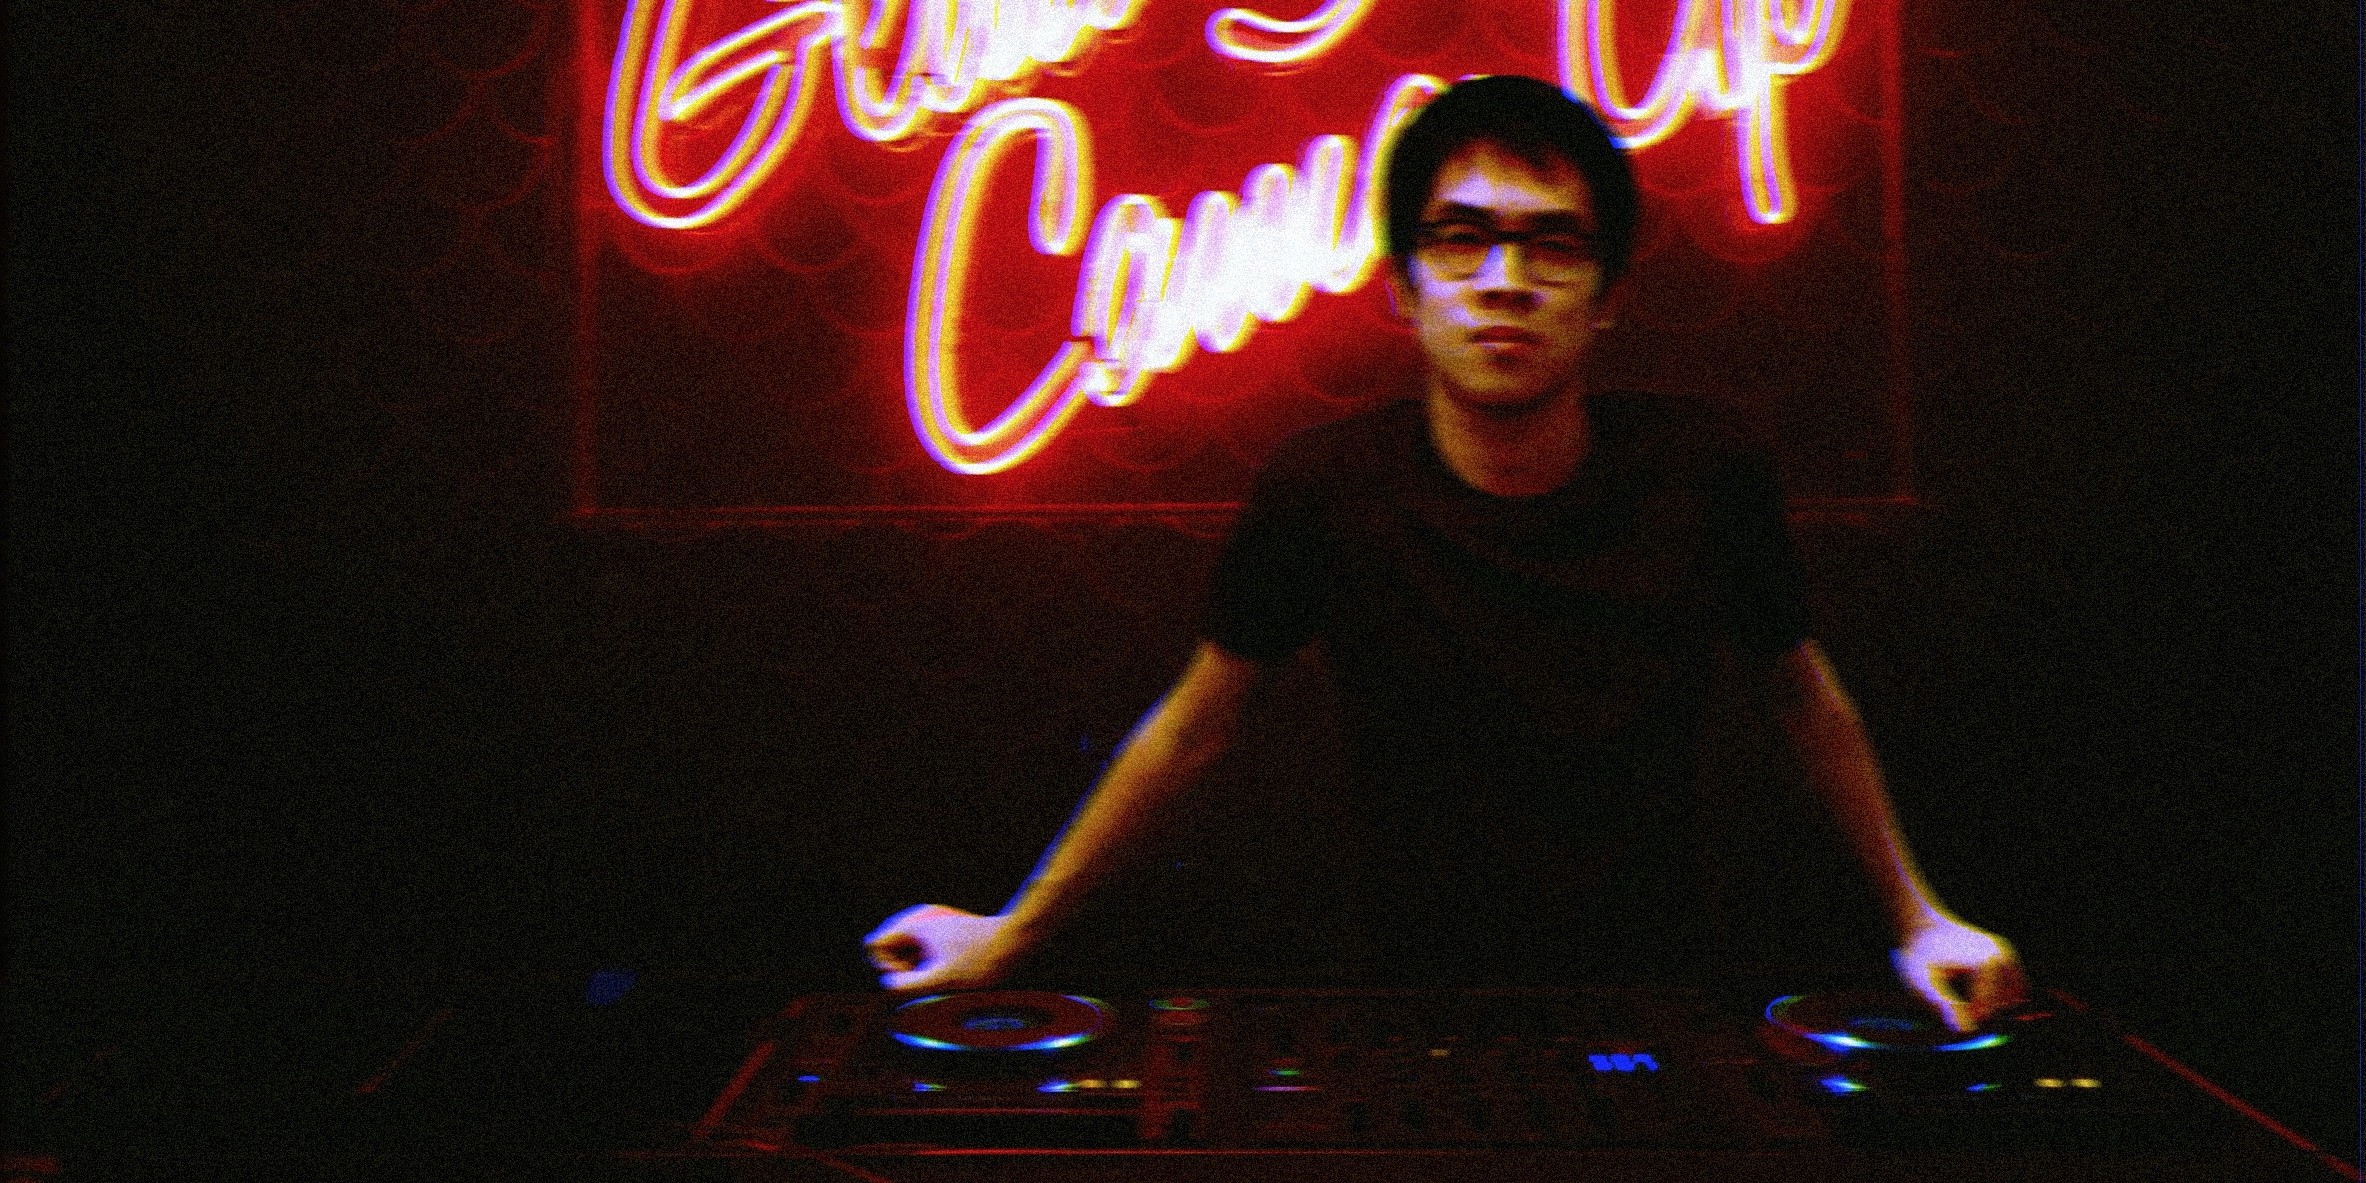 Charlie Lim abandons guitars and melancholy, announces new career in EDM